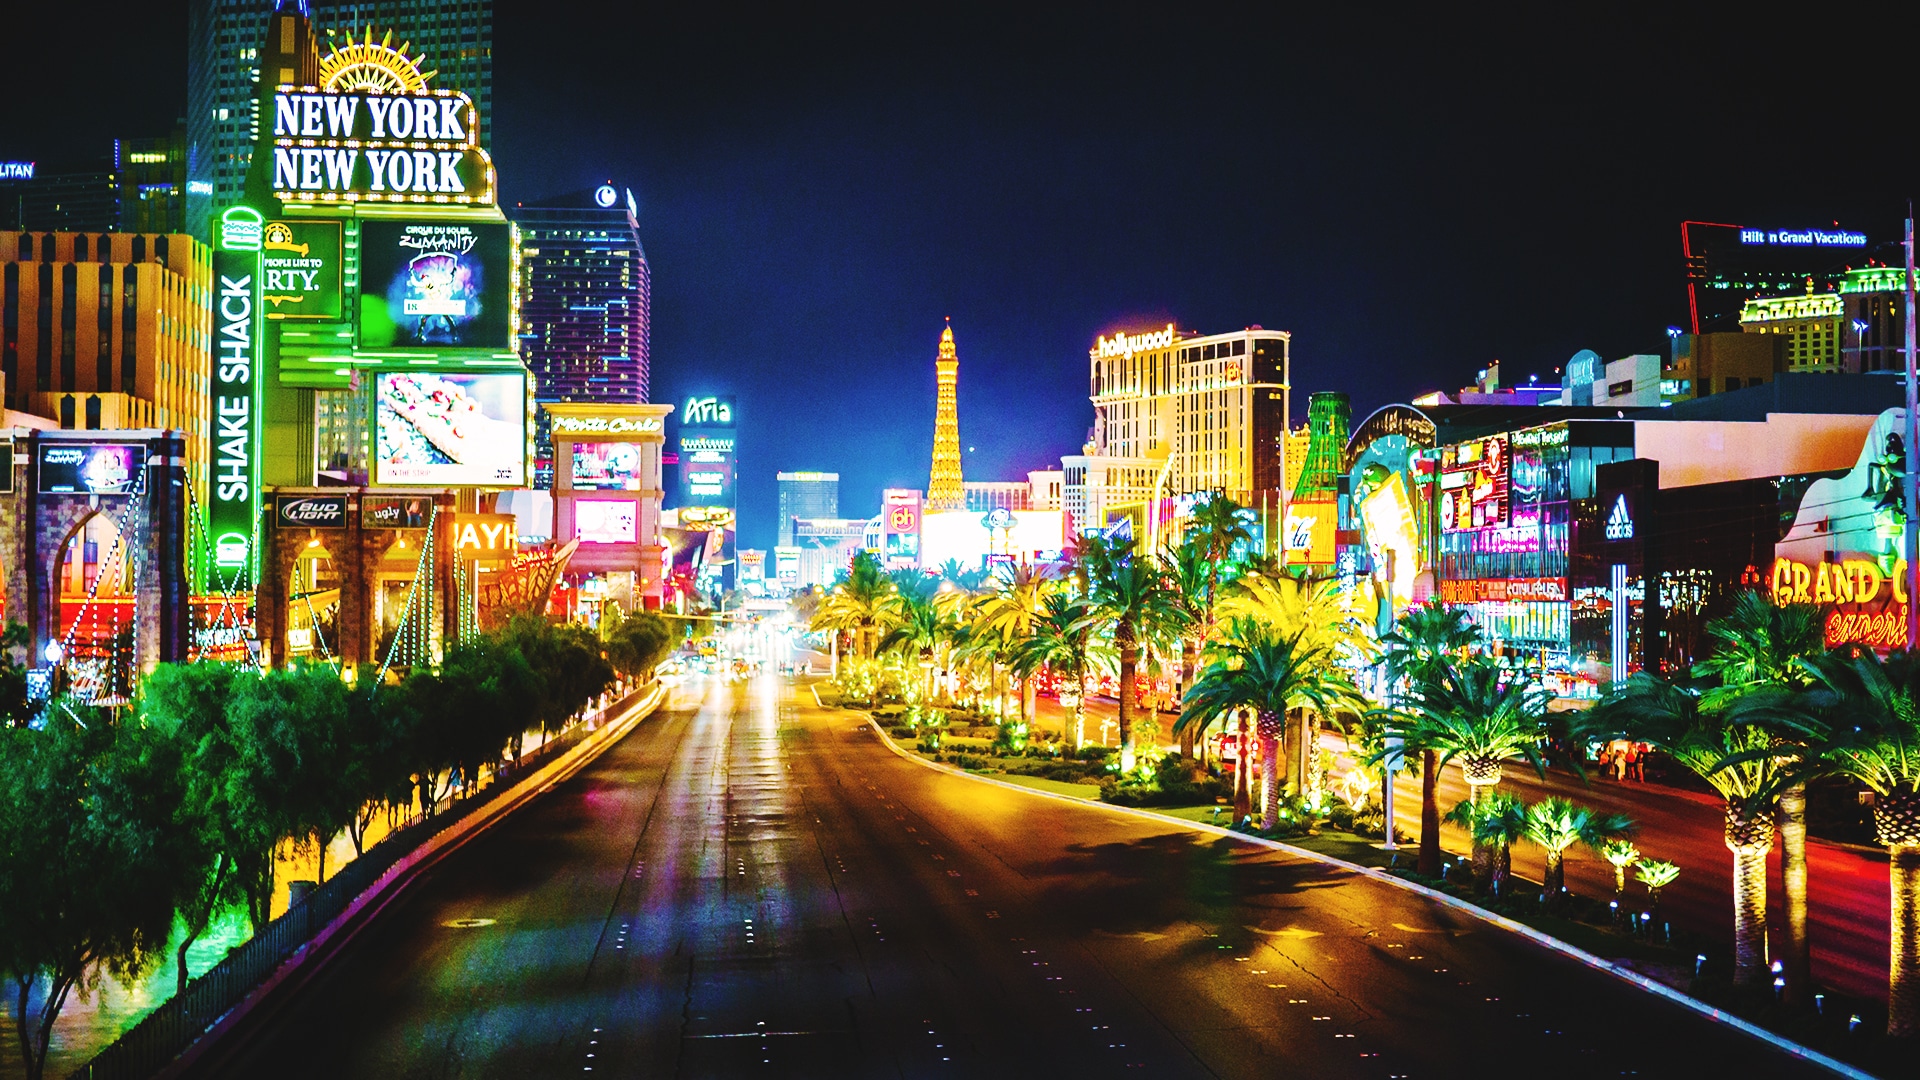 The Las Vegas Strip at Night plays host to our blog post about Pubcon 2017.